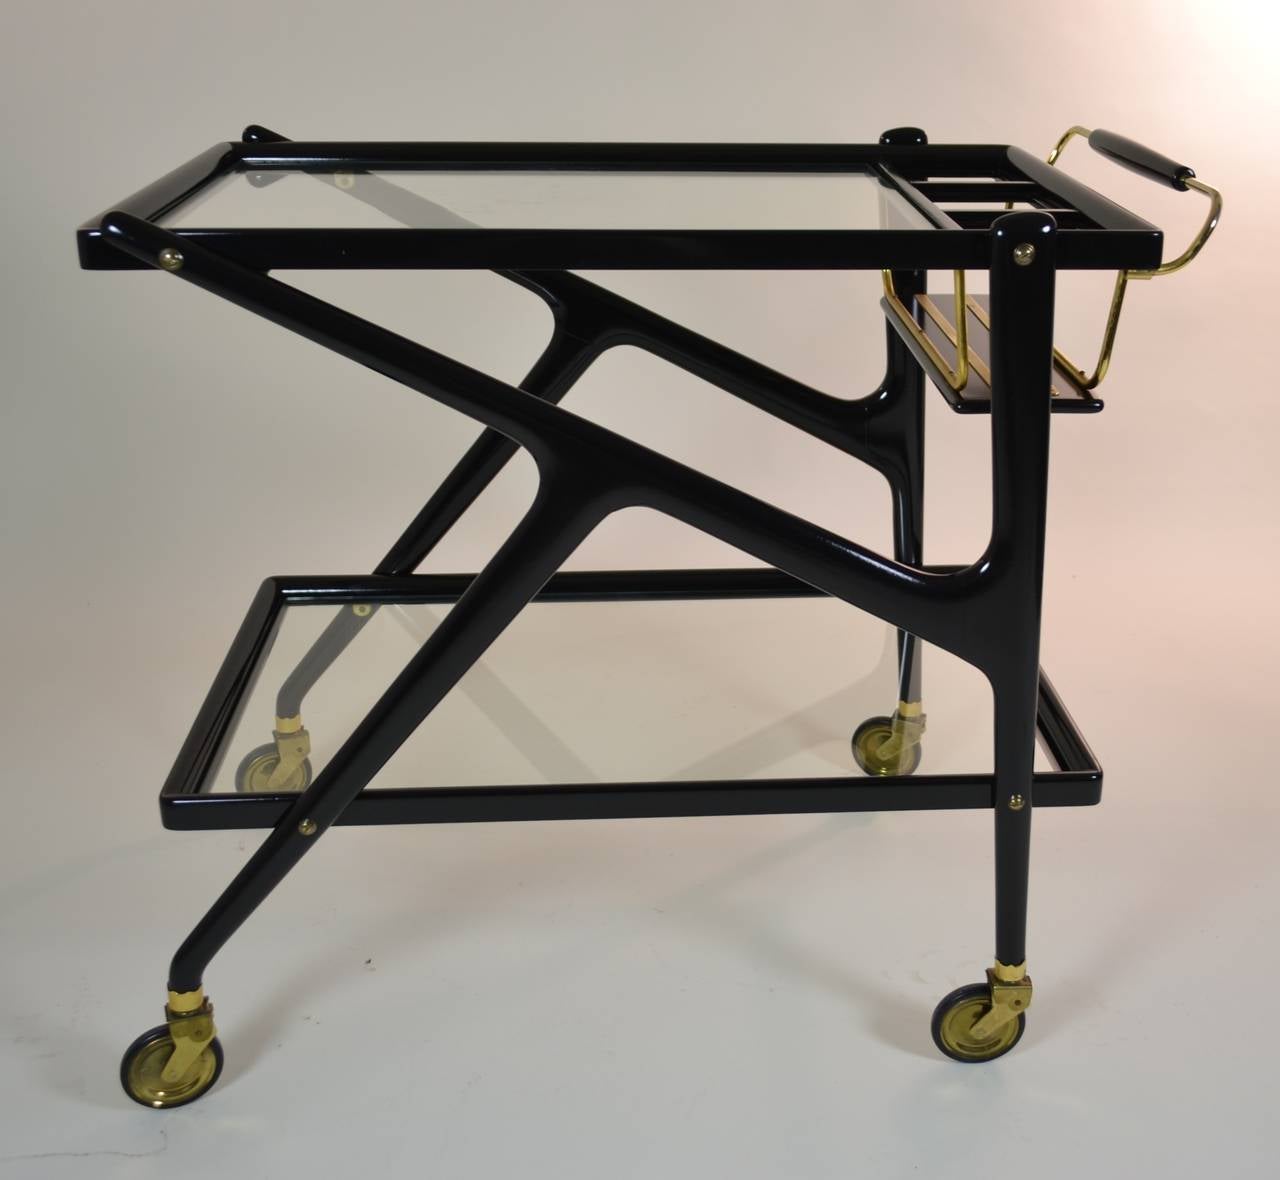 A handsome Cesare Lacca cocktail cart in high gloss black lacquer with polished brass details and including Classic bottle rack with three slots. In excellent condition.